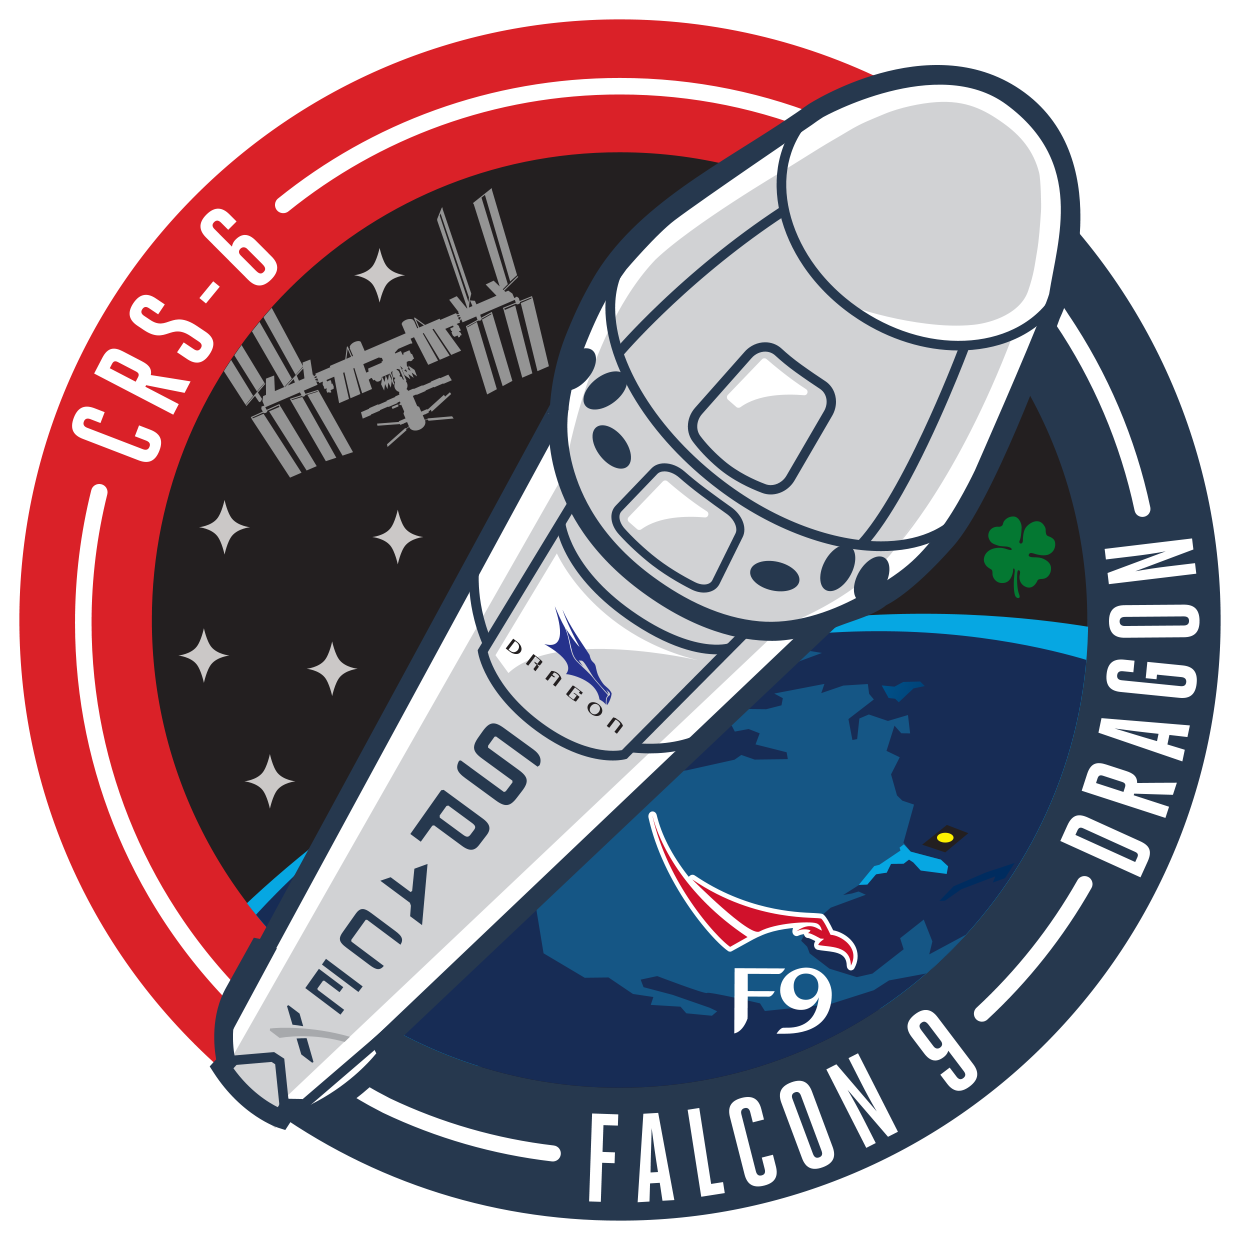 Related Spacex Rocket Clipart - Spacex Falcon 9 Logo (1305x1305)